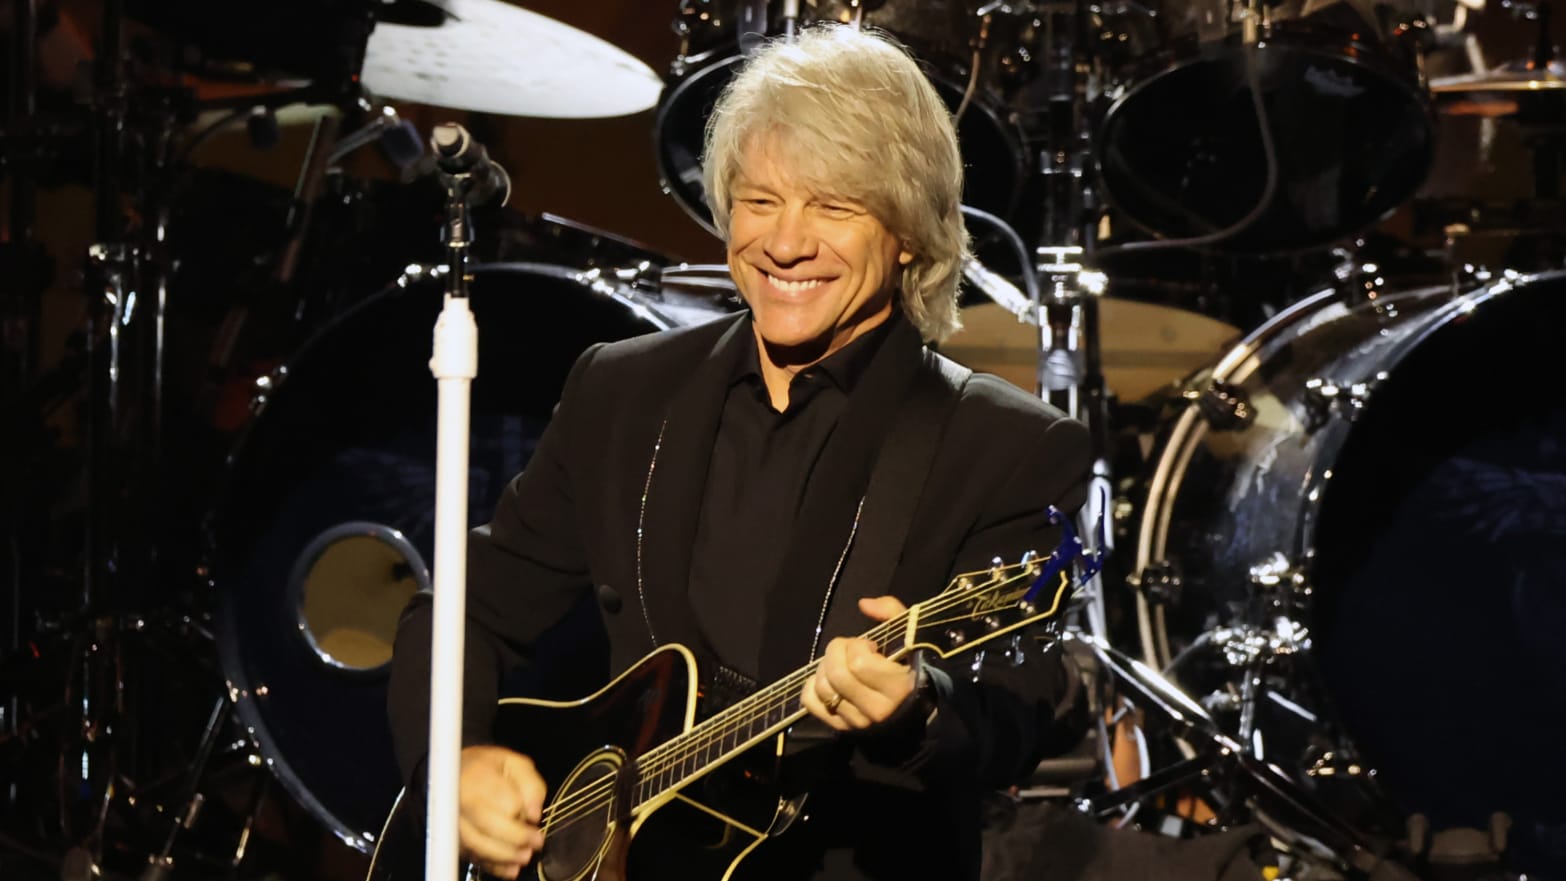 Jon Bon Jovi performs at MusiCares Person of the Year honors